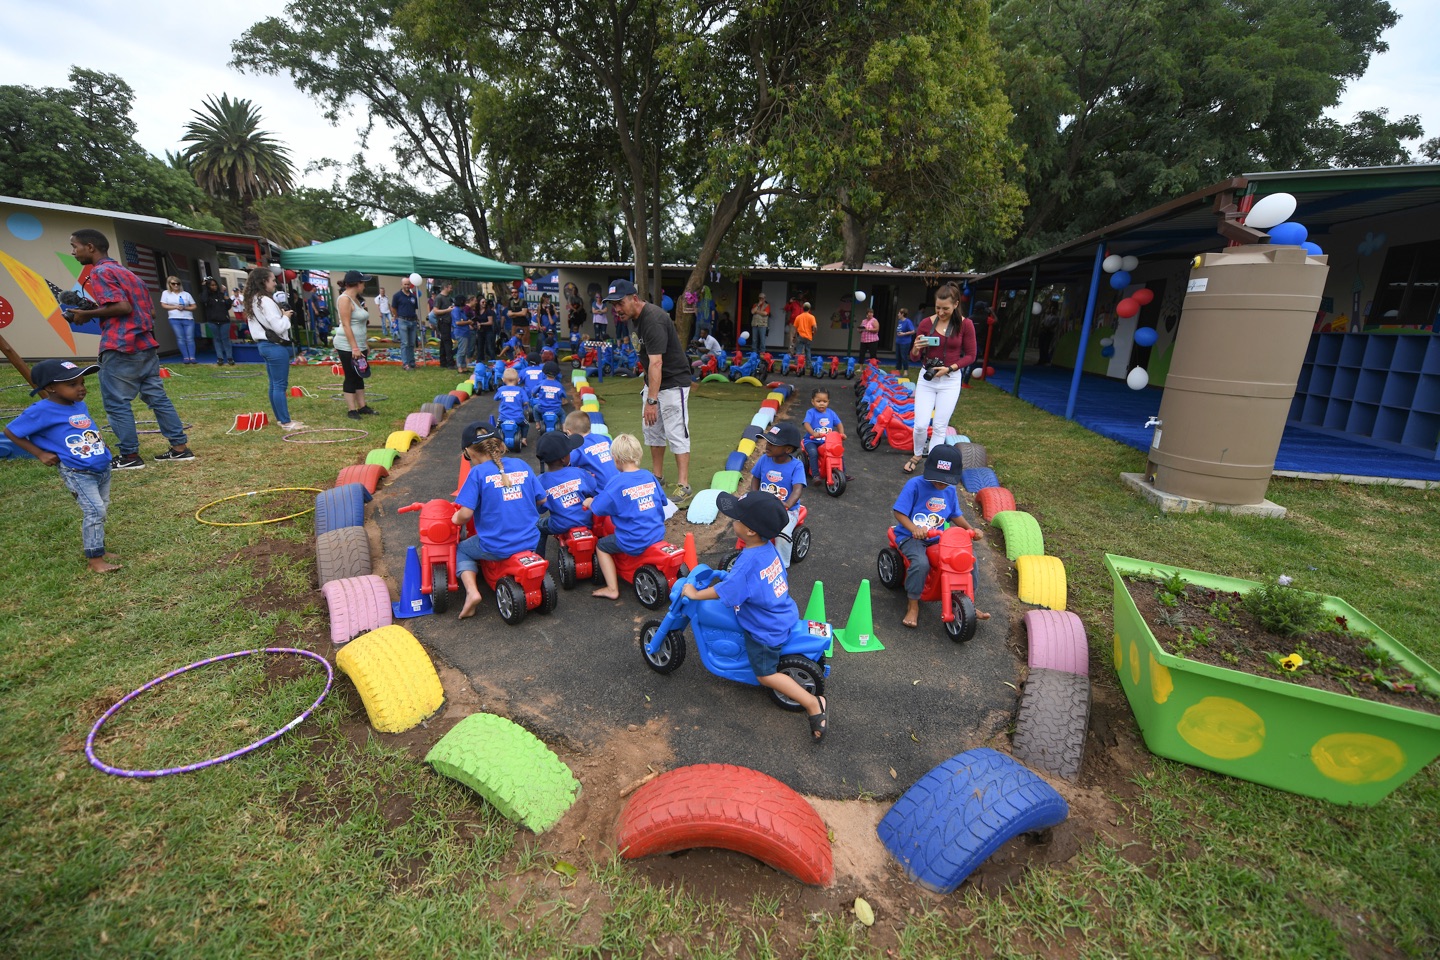 Children playing at Liqui Moly event